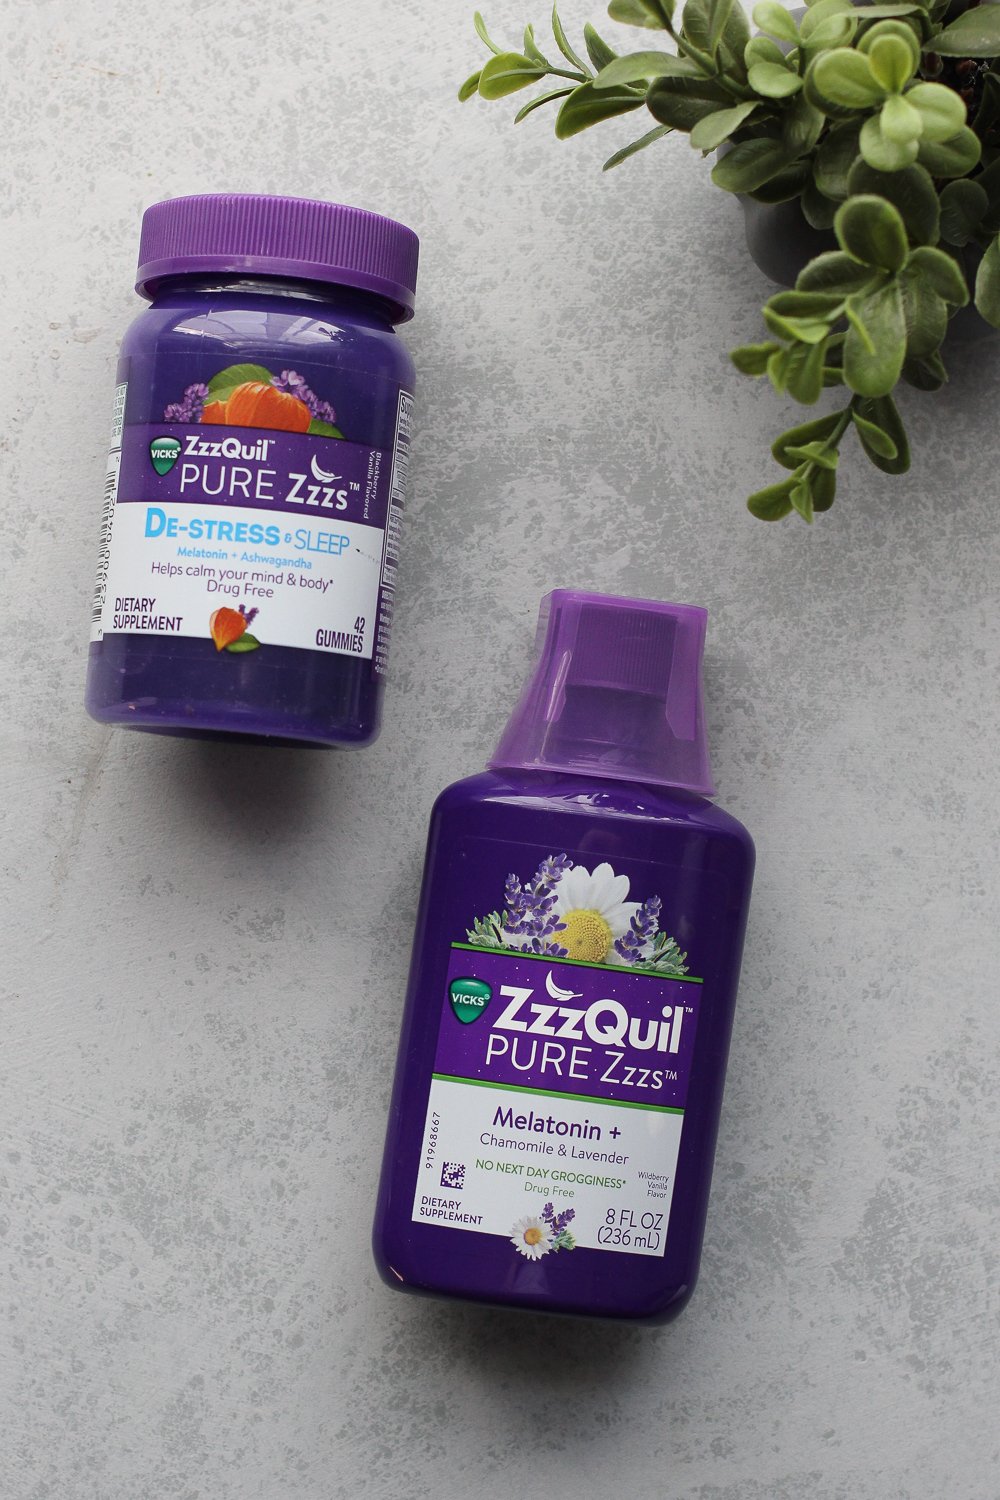 zzquil in a bottle